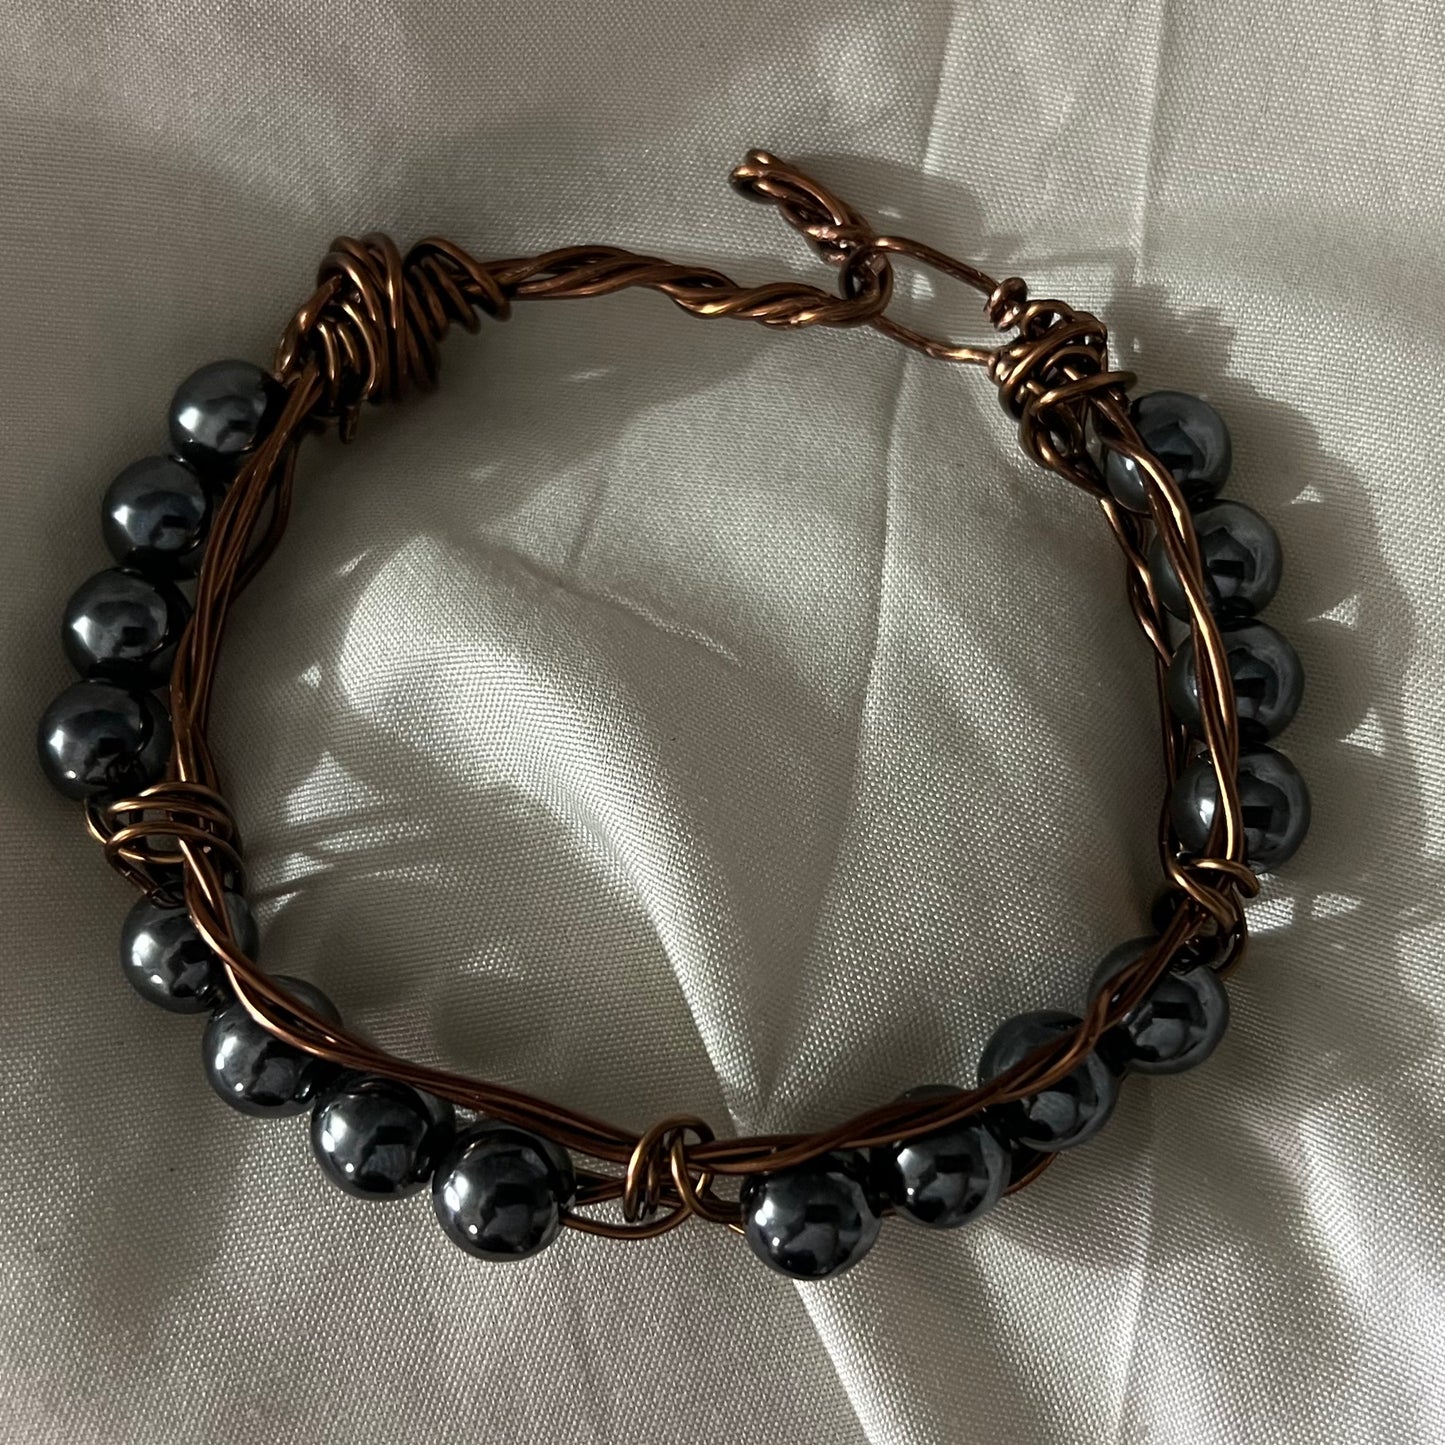 Hematite men’s bracelet- to restore, strengthen and regulate blood supply. Great for anxiety